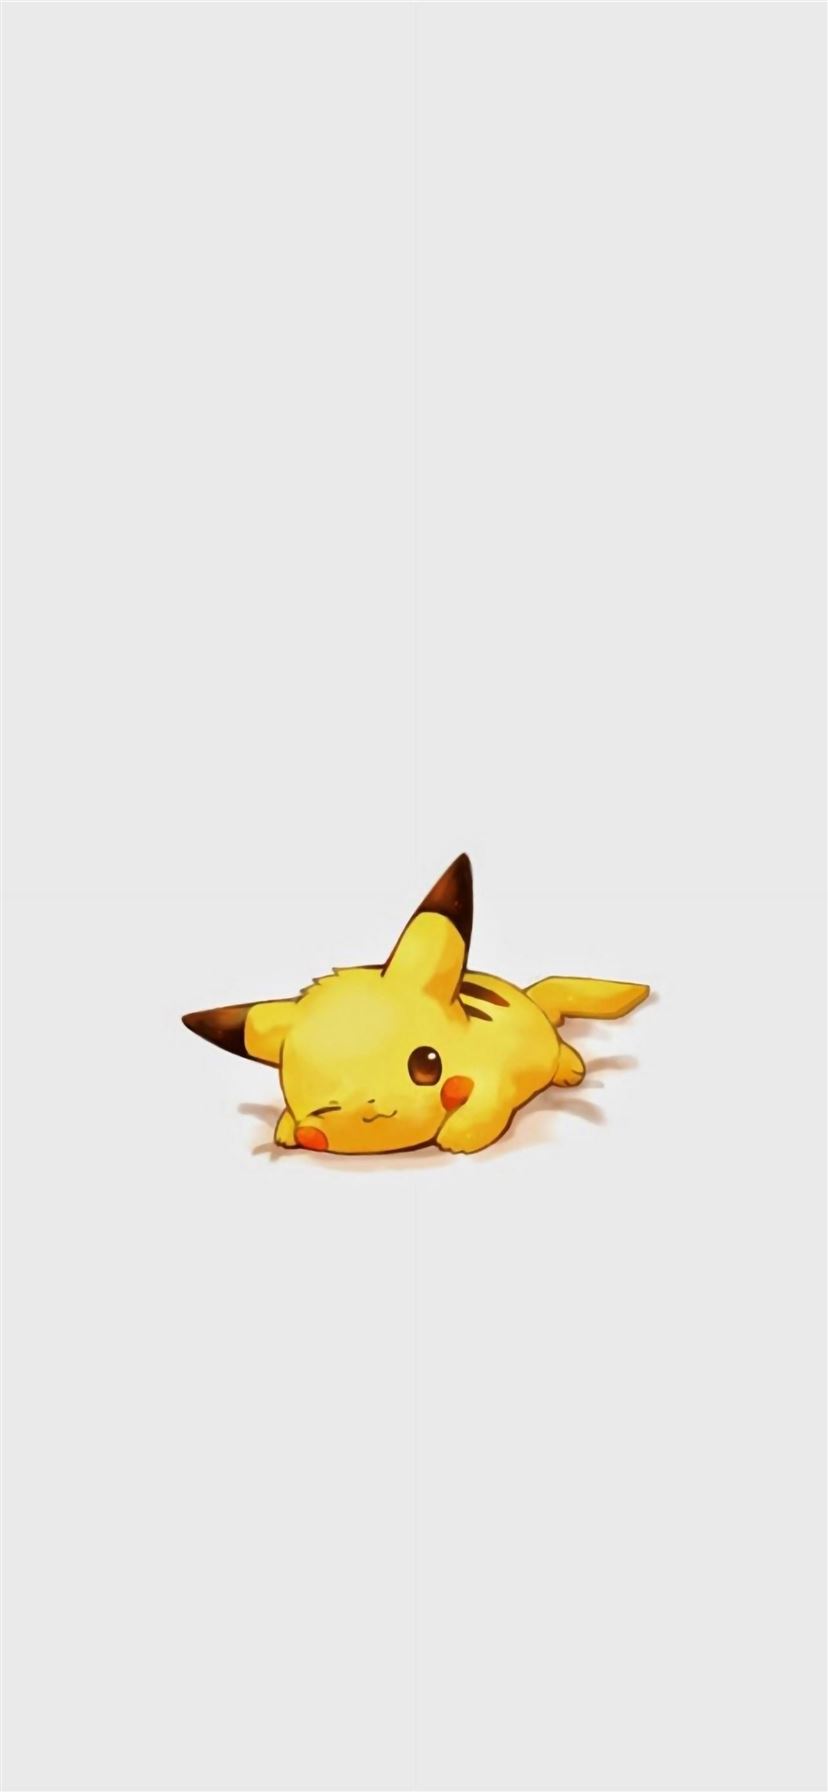 Cute Pikachu Pokemon Character iPhone Wallpapers Free Download